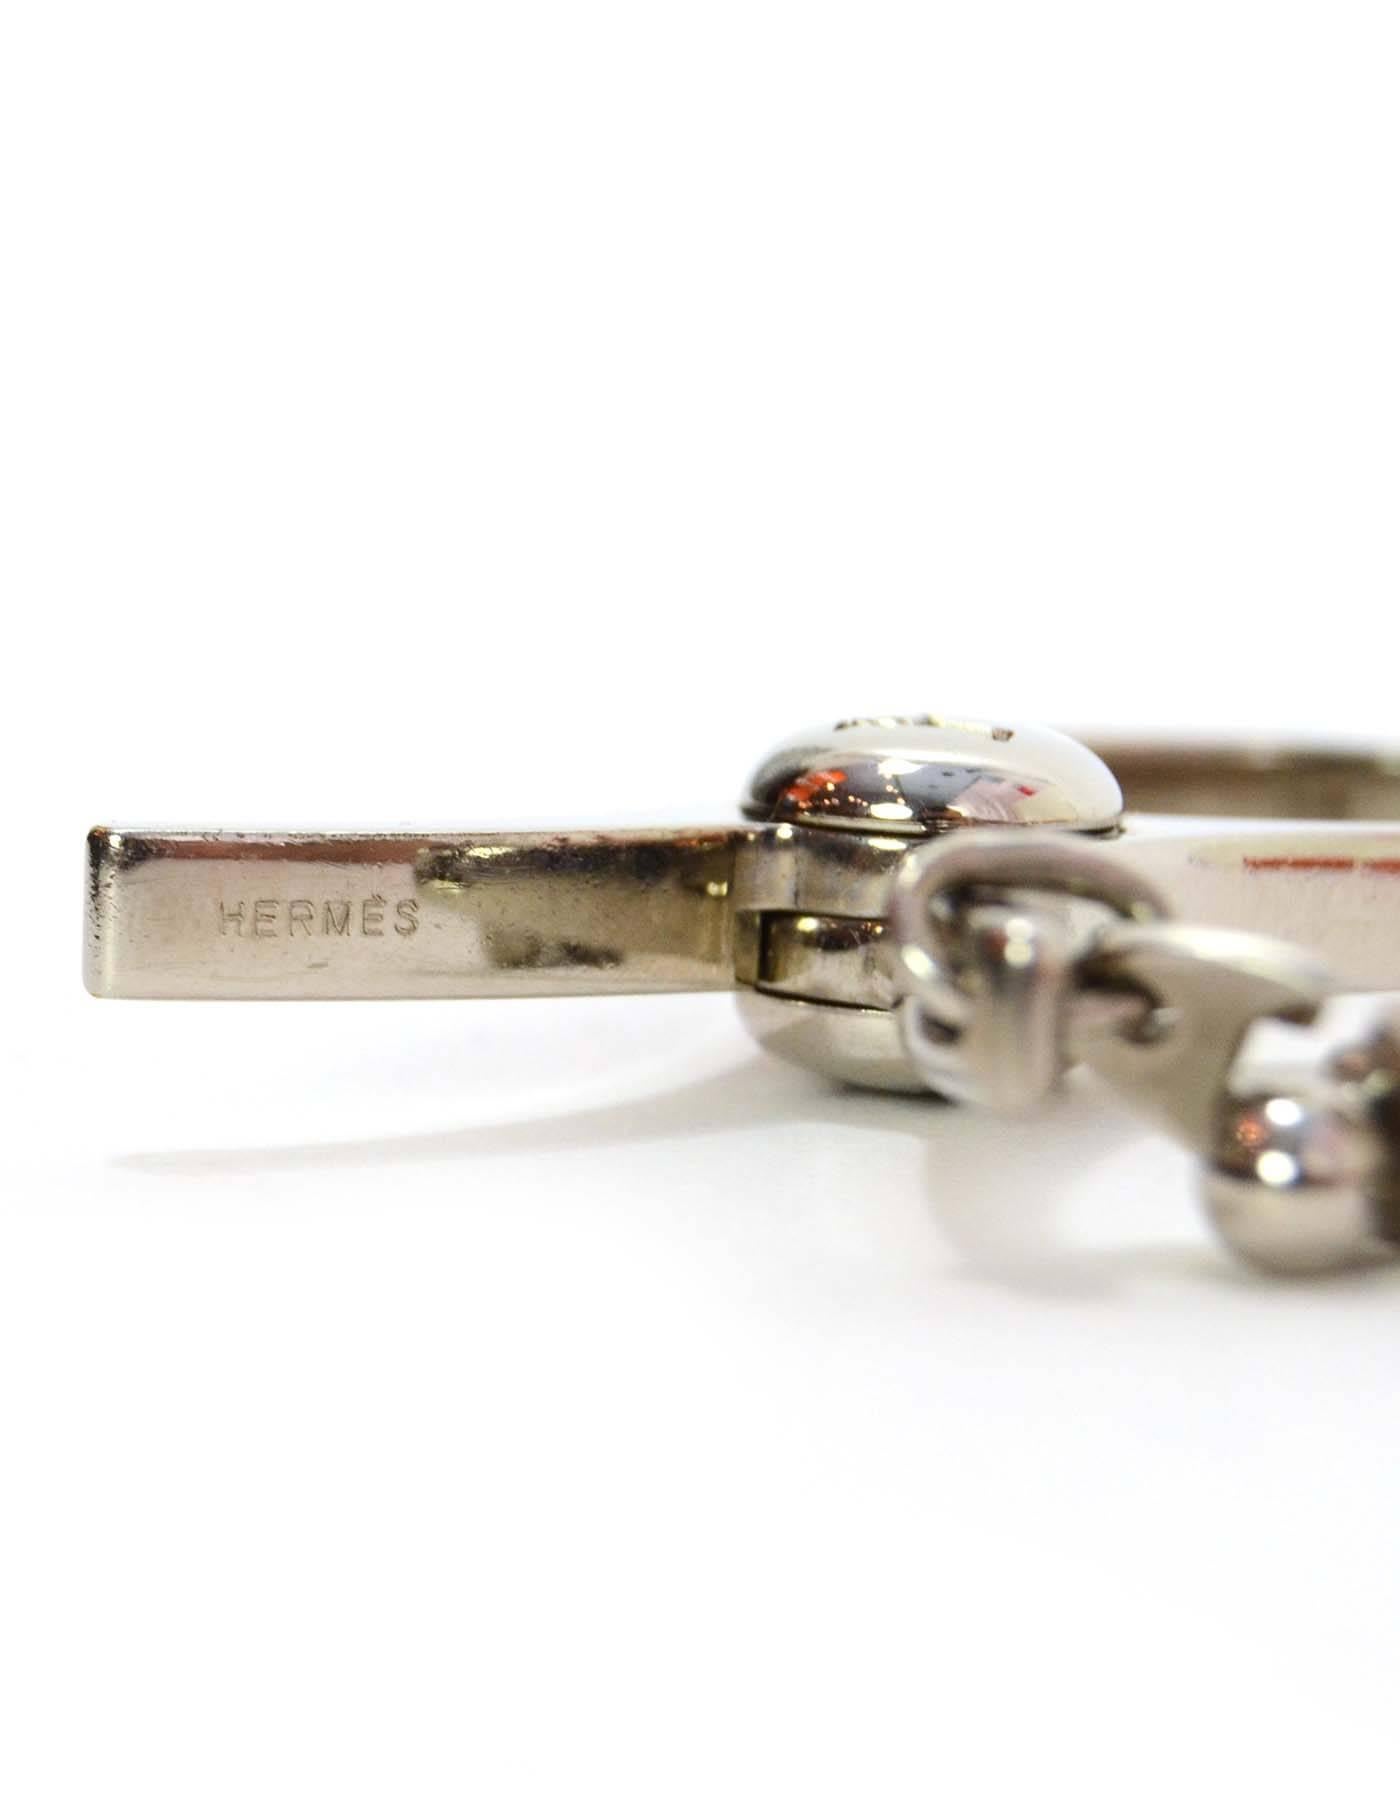 Hermes Silver Filou Glove Clip 
Features H engraved on push lever
Color: Silvertone
Materials: Metal
Closure/Opening: Push hinge
Stamp: Hermes
Retail Price: $335 + tax
Overall Condition: Excellent pre-owned condition
Includes: Hermes